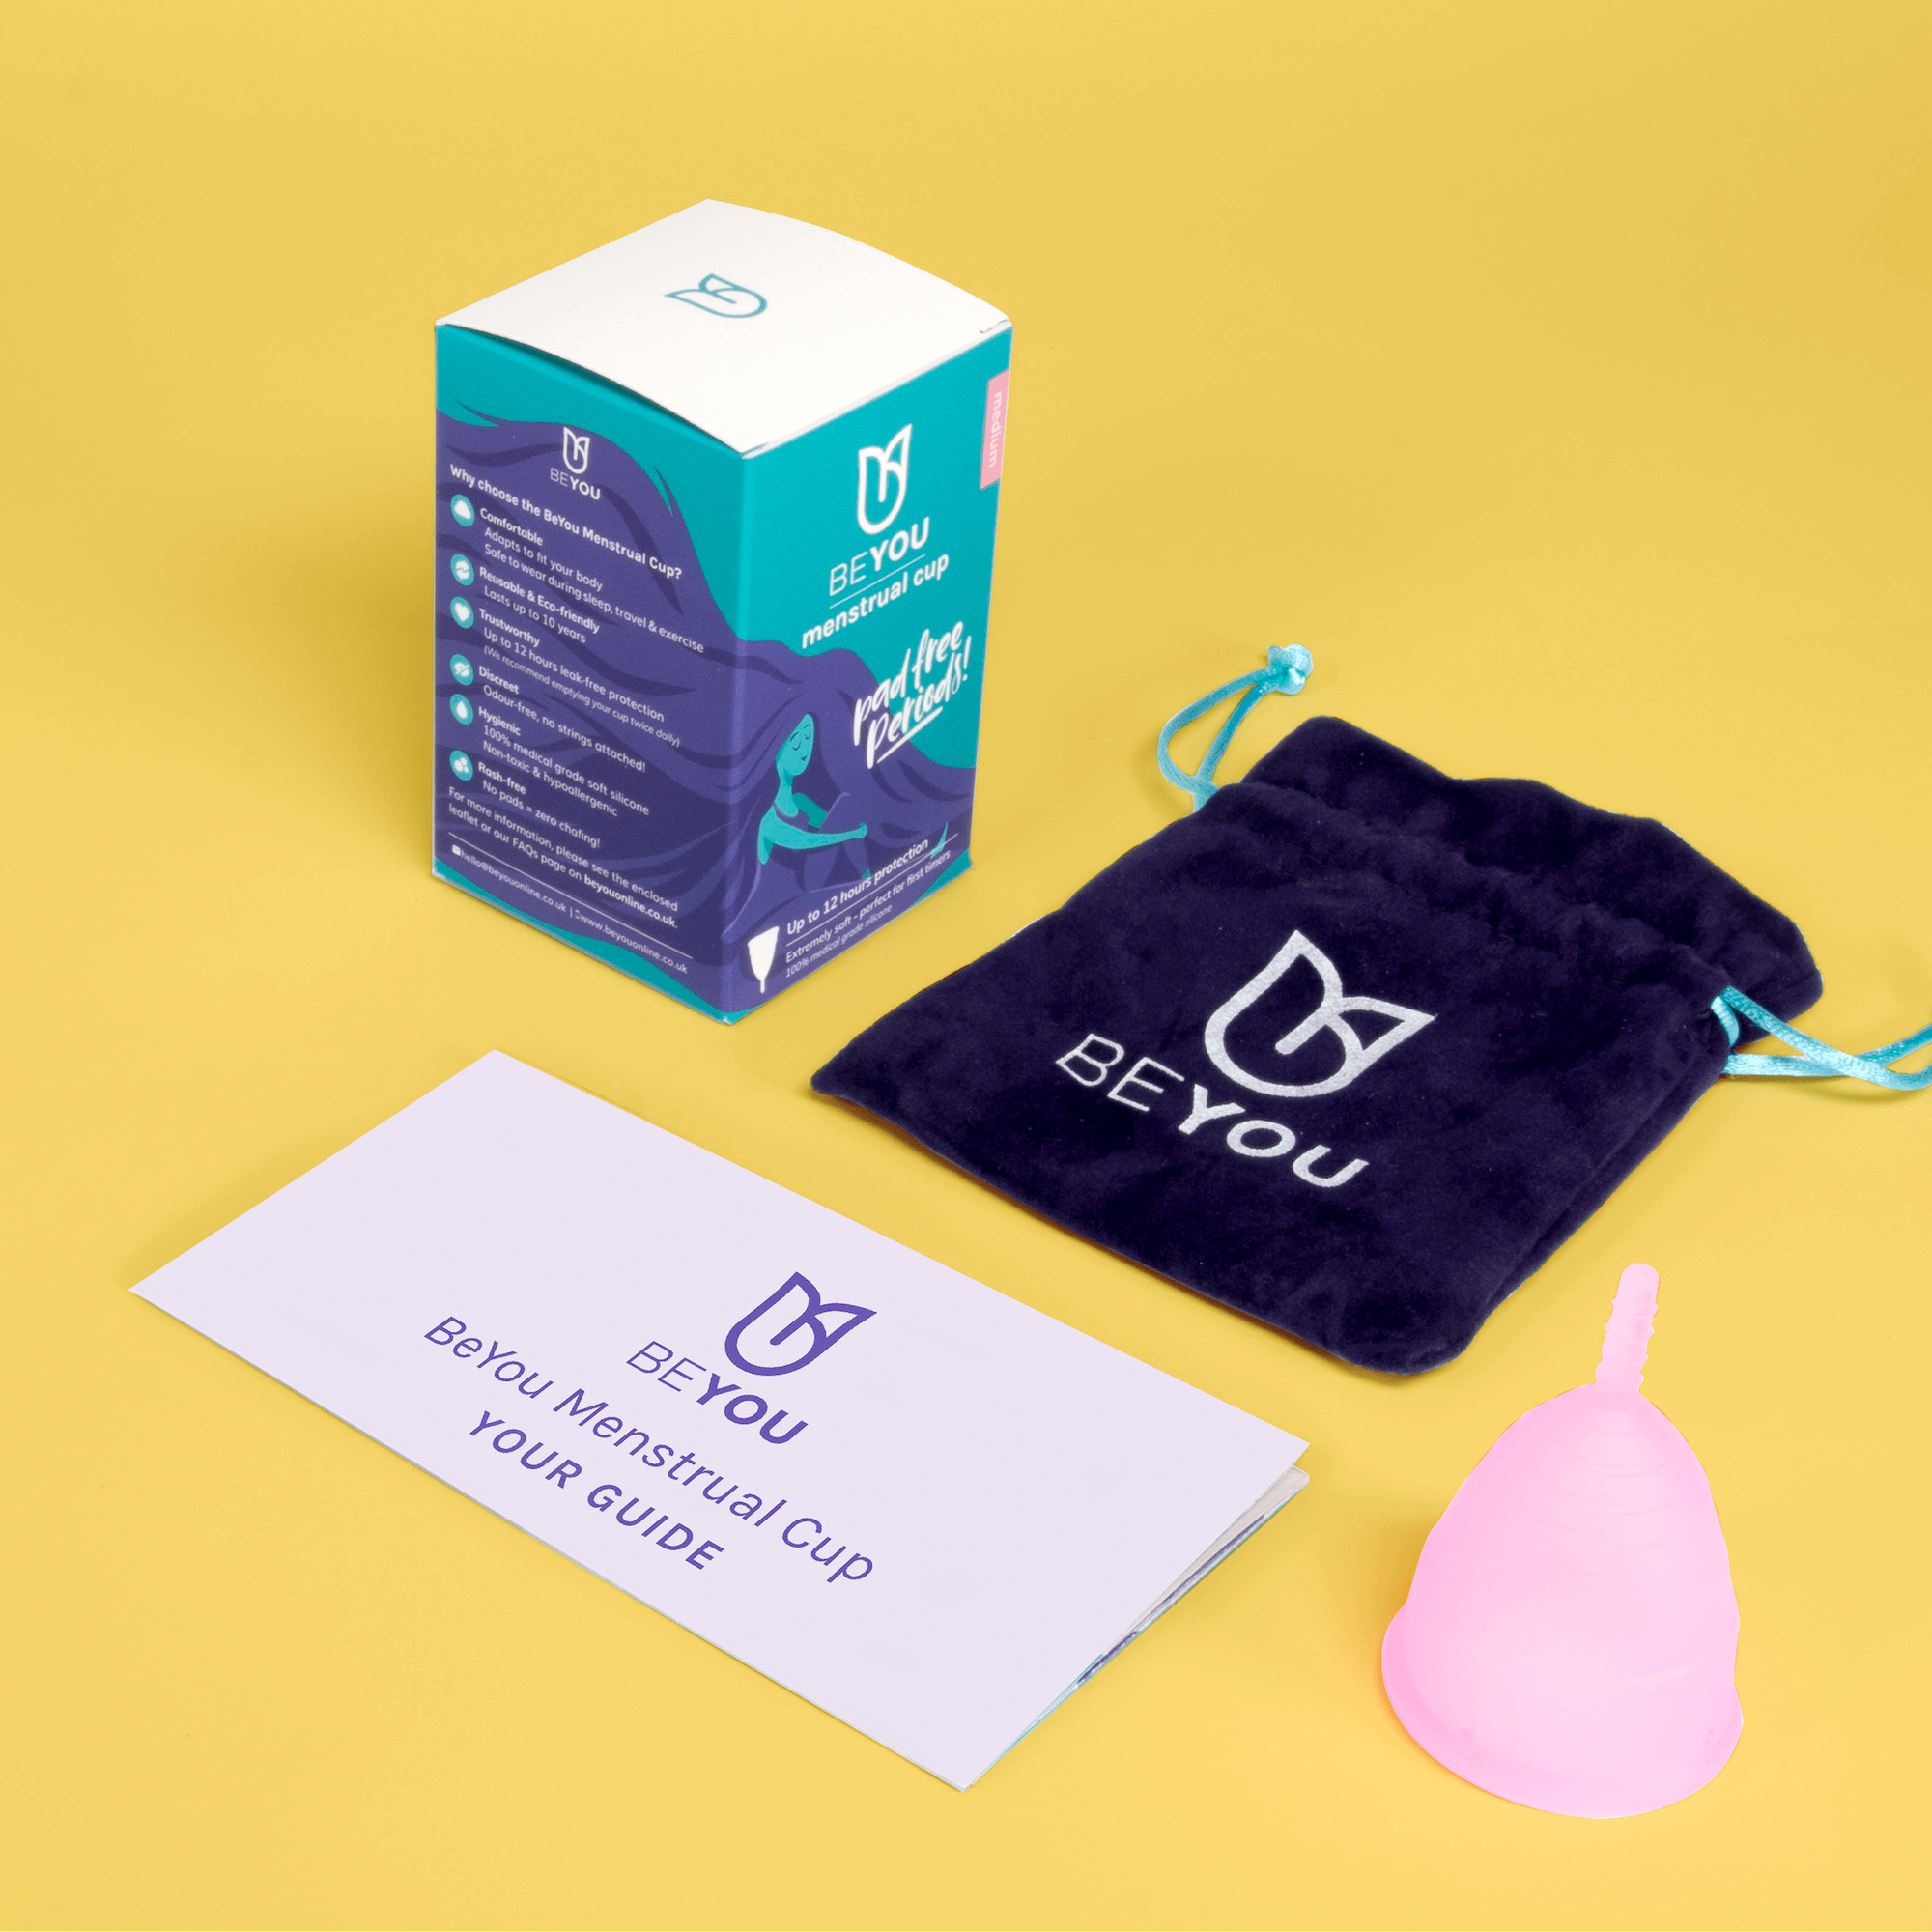 DUTCHESS Menstrual Cup - Reusable, Soft, Medical-Grade Silicone Period Cups  - Easy to Clean Tampon and Pad Alternative - Small, Pink & Purple  Multi-colored Small (Pack of 2)